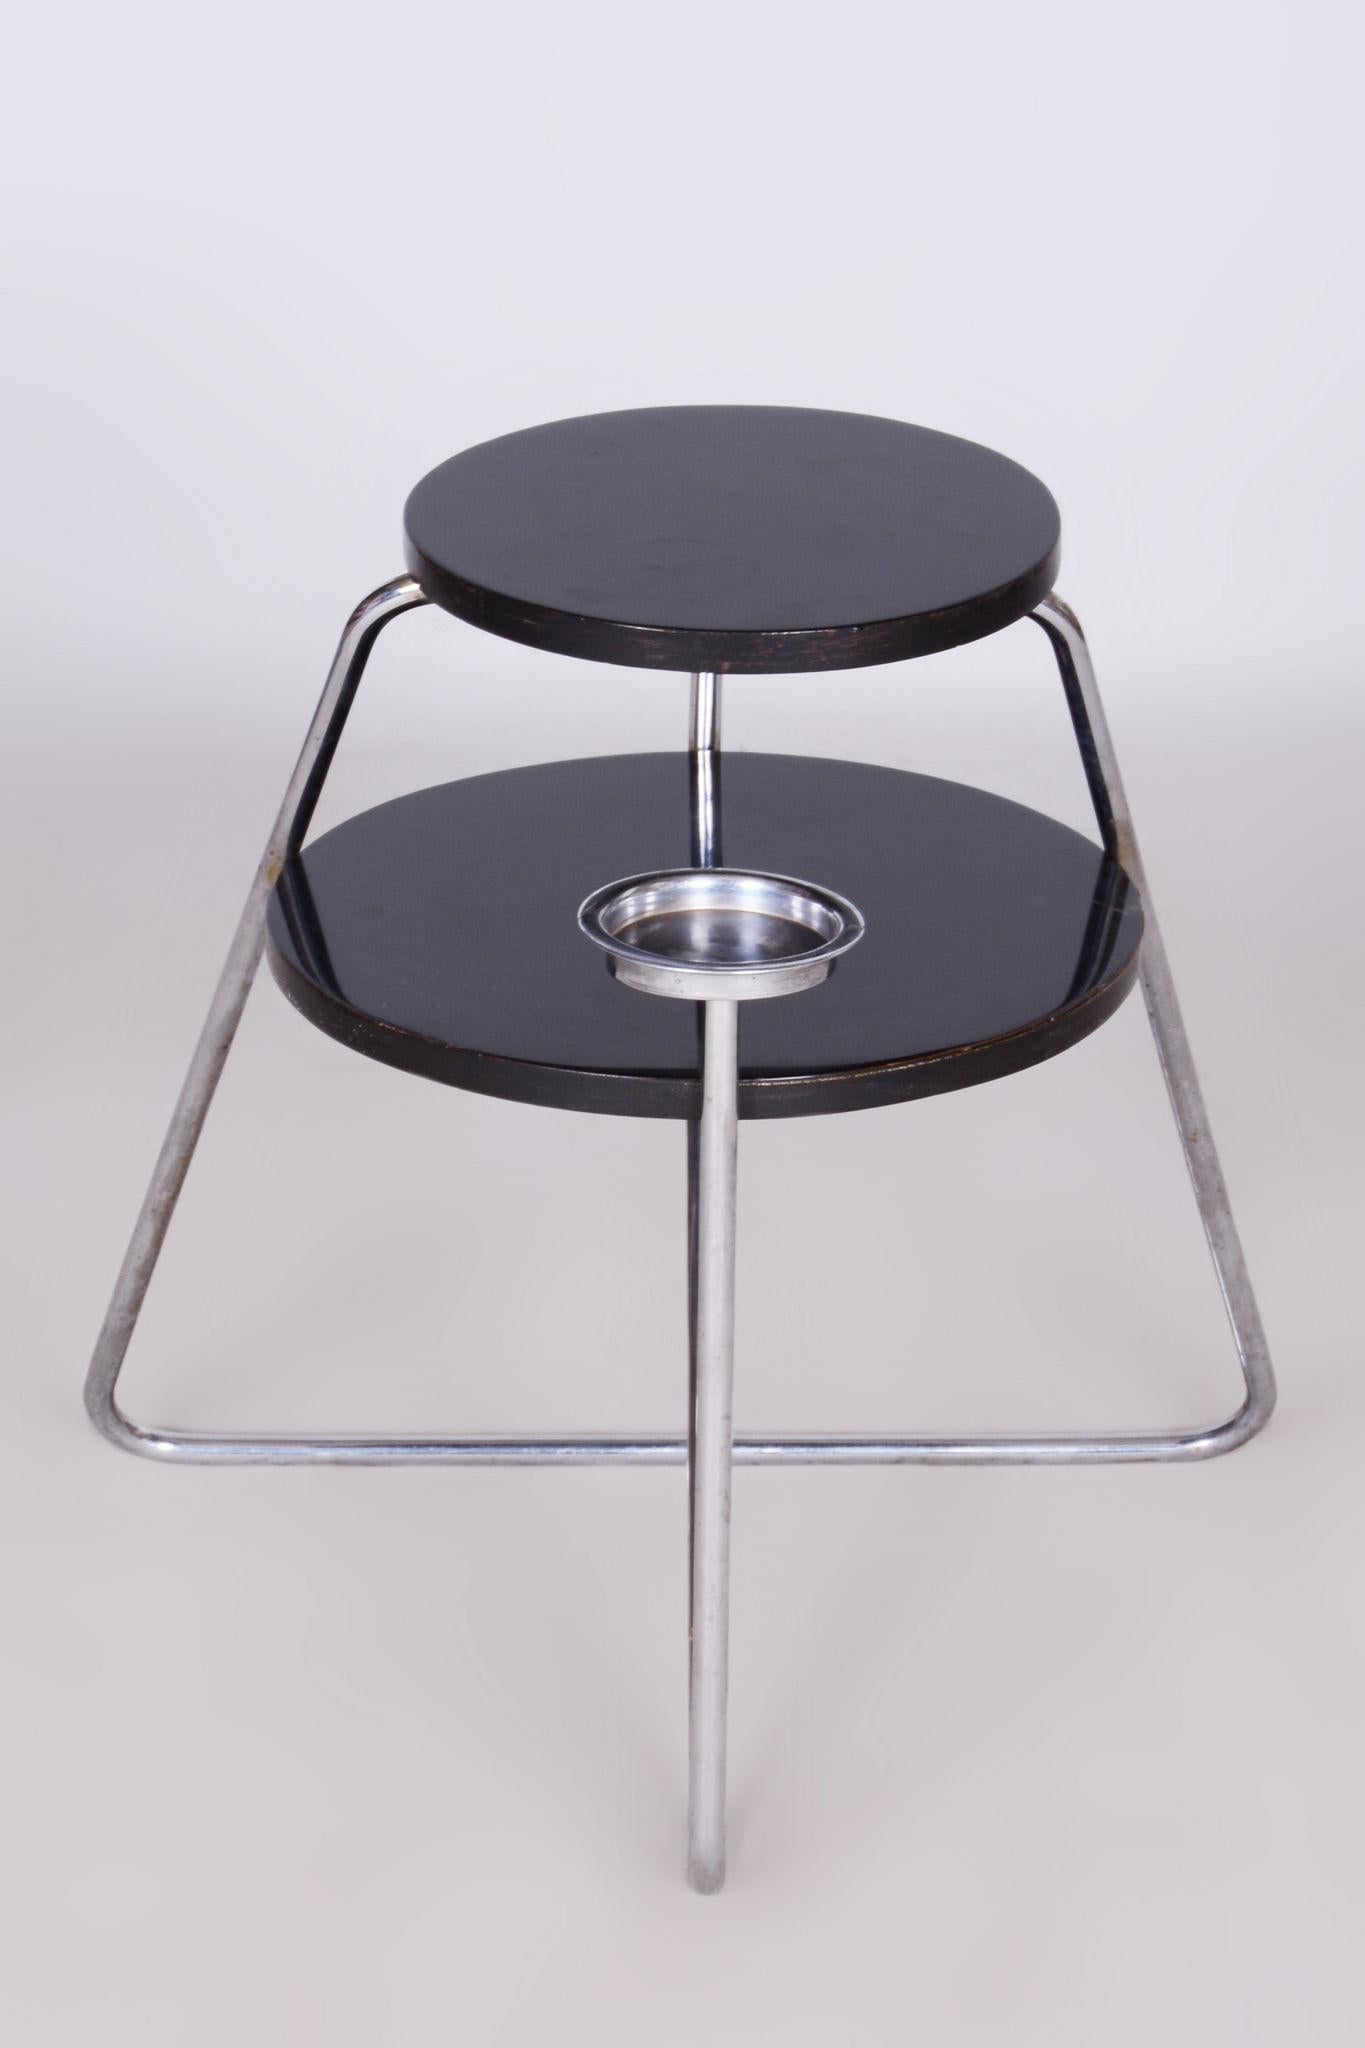 Restored Bauhaus Small Table, Chrome, Revived Polish, Czechia, 1930s For Sale 1